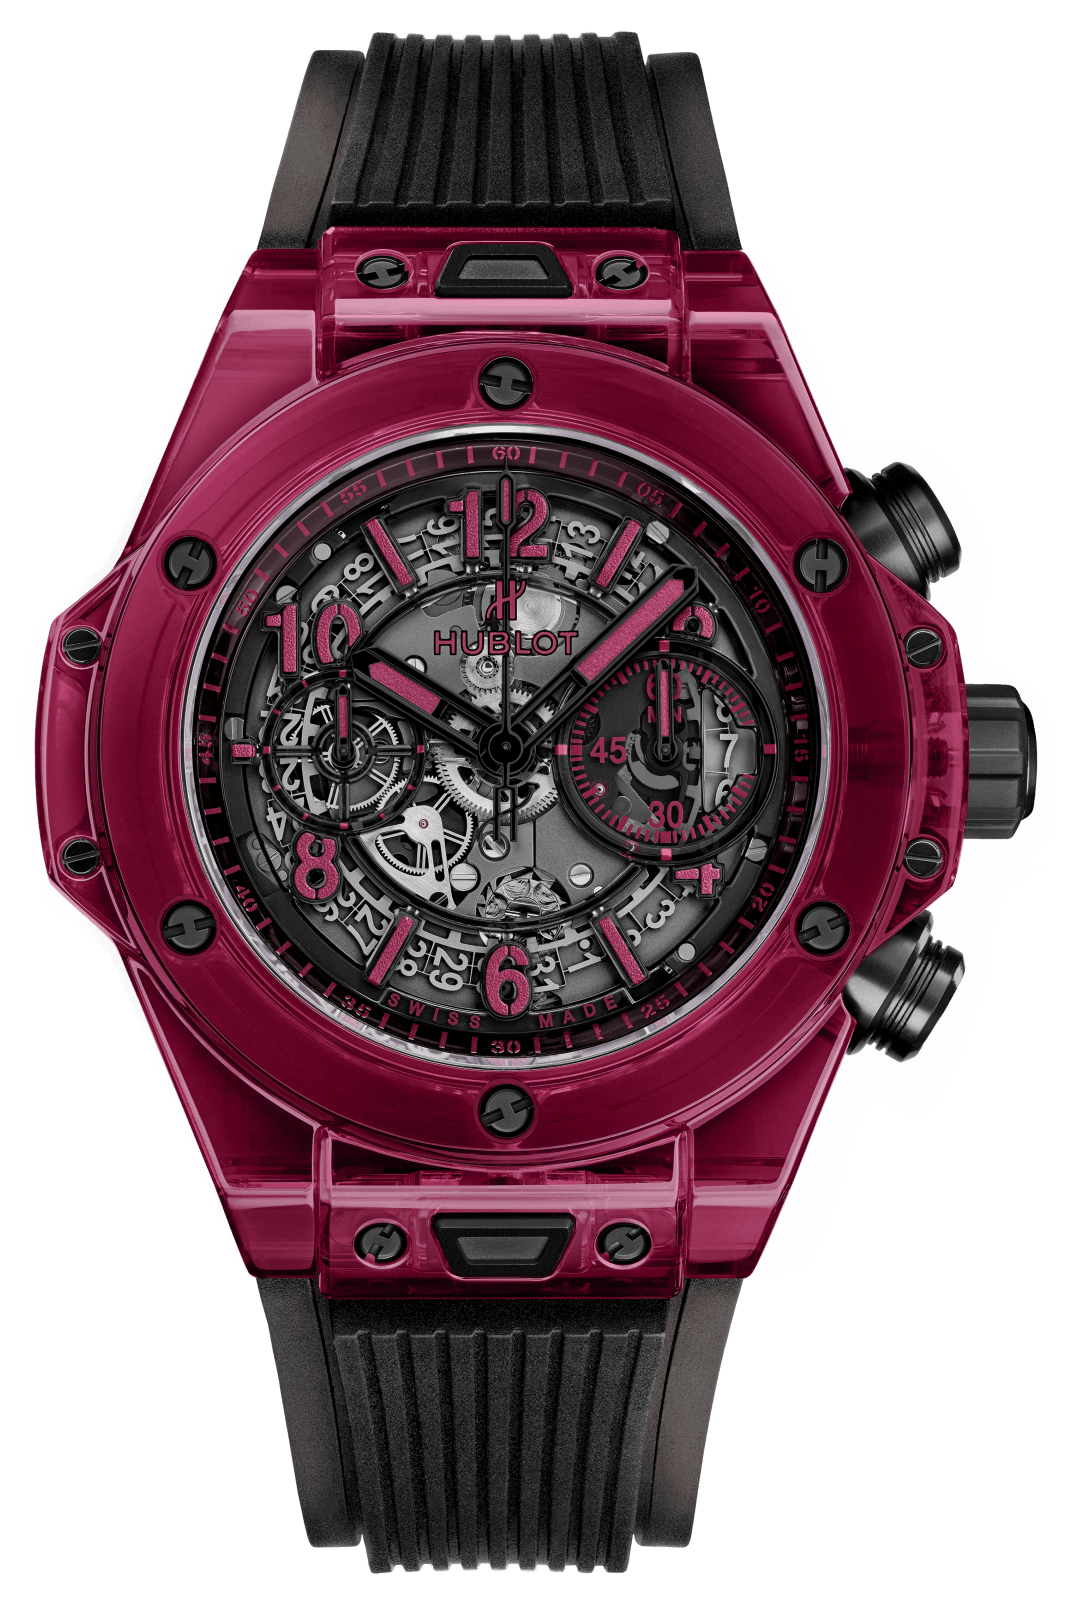 Hublot Big Bang Unico Red Men's Watch - buy at the in Catalogue of premium wristwatches SWISSWATCHESFORSALE.com